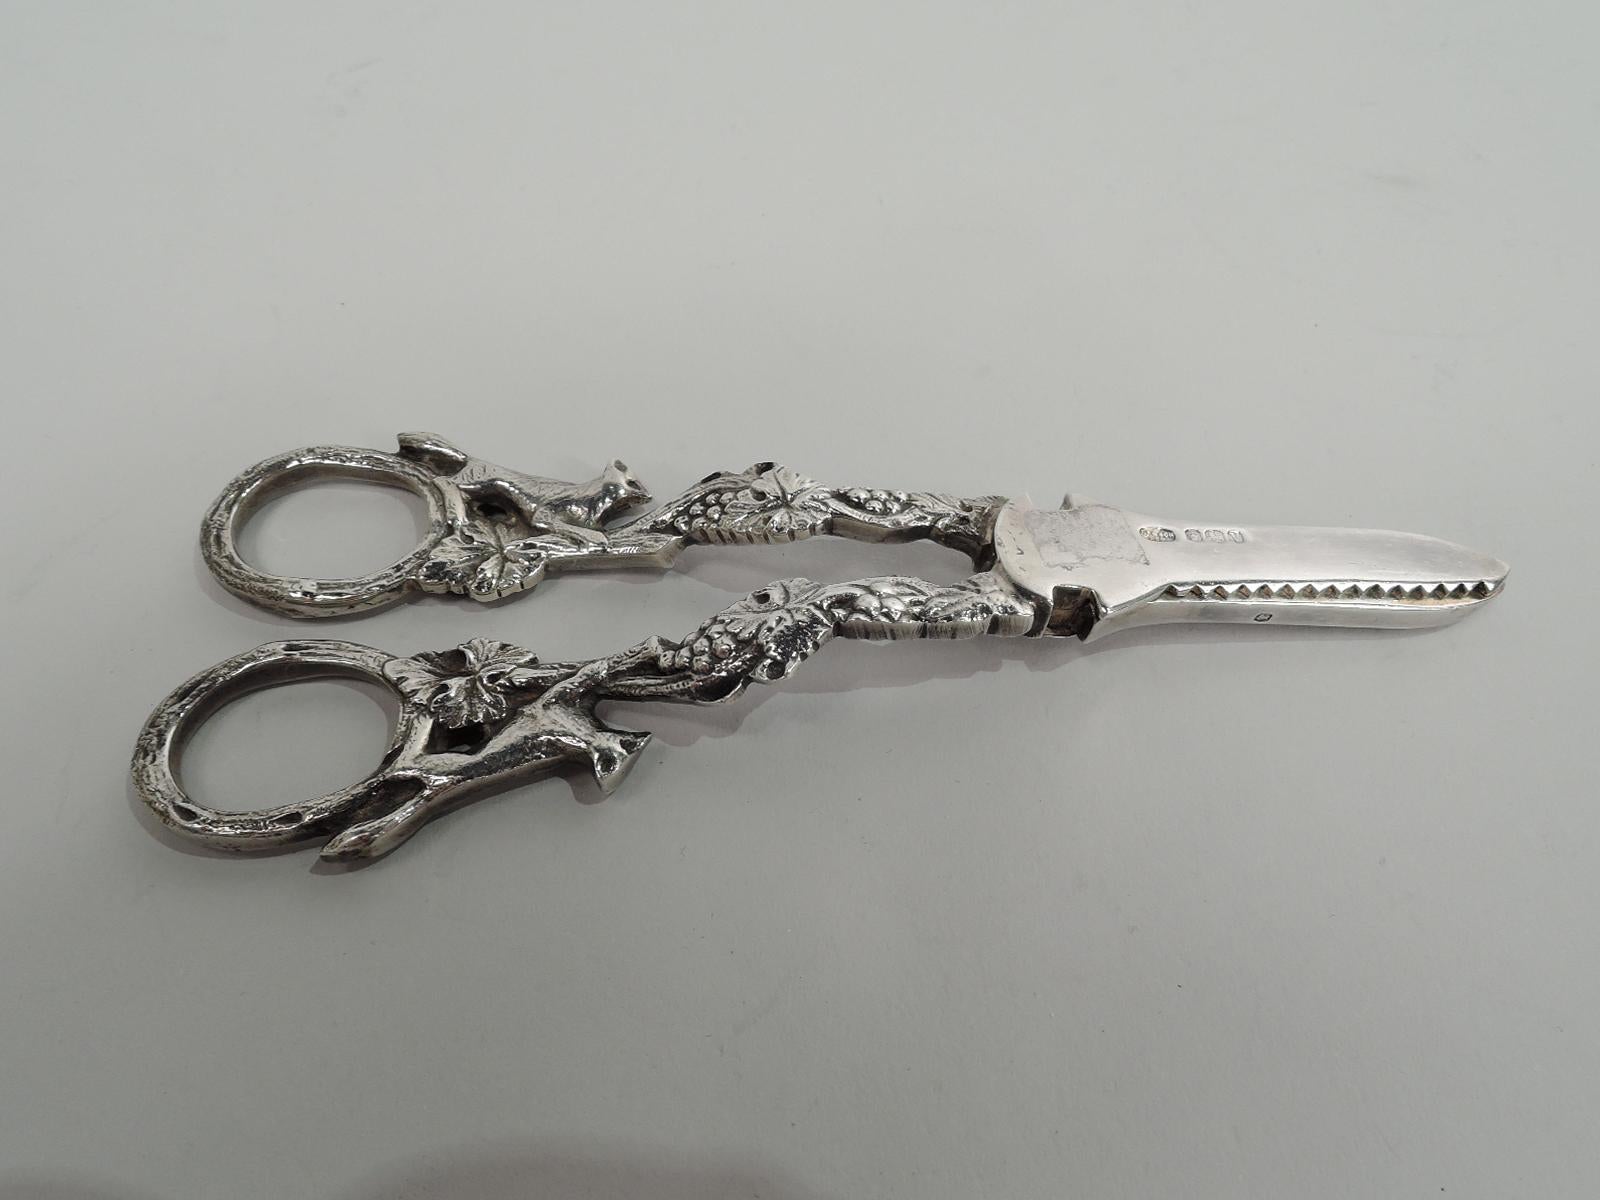 Elizabeth II sterling silver grape shears. Made by Israel Freeman & Son, Ltd in Sheffield in 1963. Double-sided fruiting grapevine handle and finger rings with foxes on hindlegs looking longingly at the out-of-reach bunches. A charming illustration